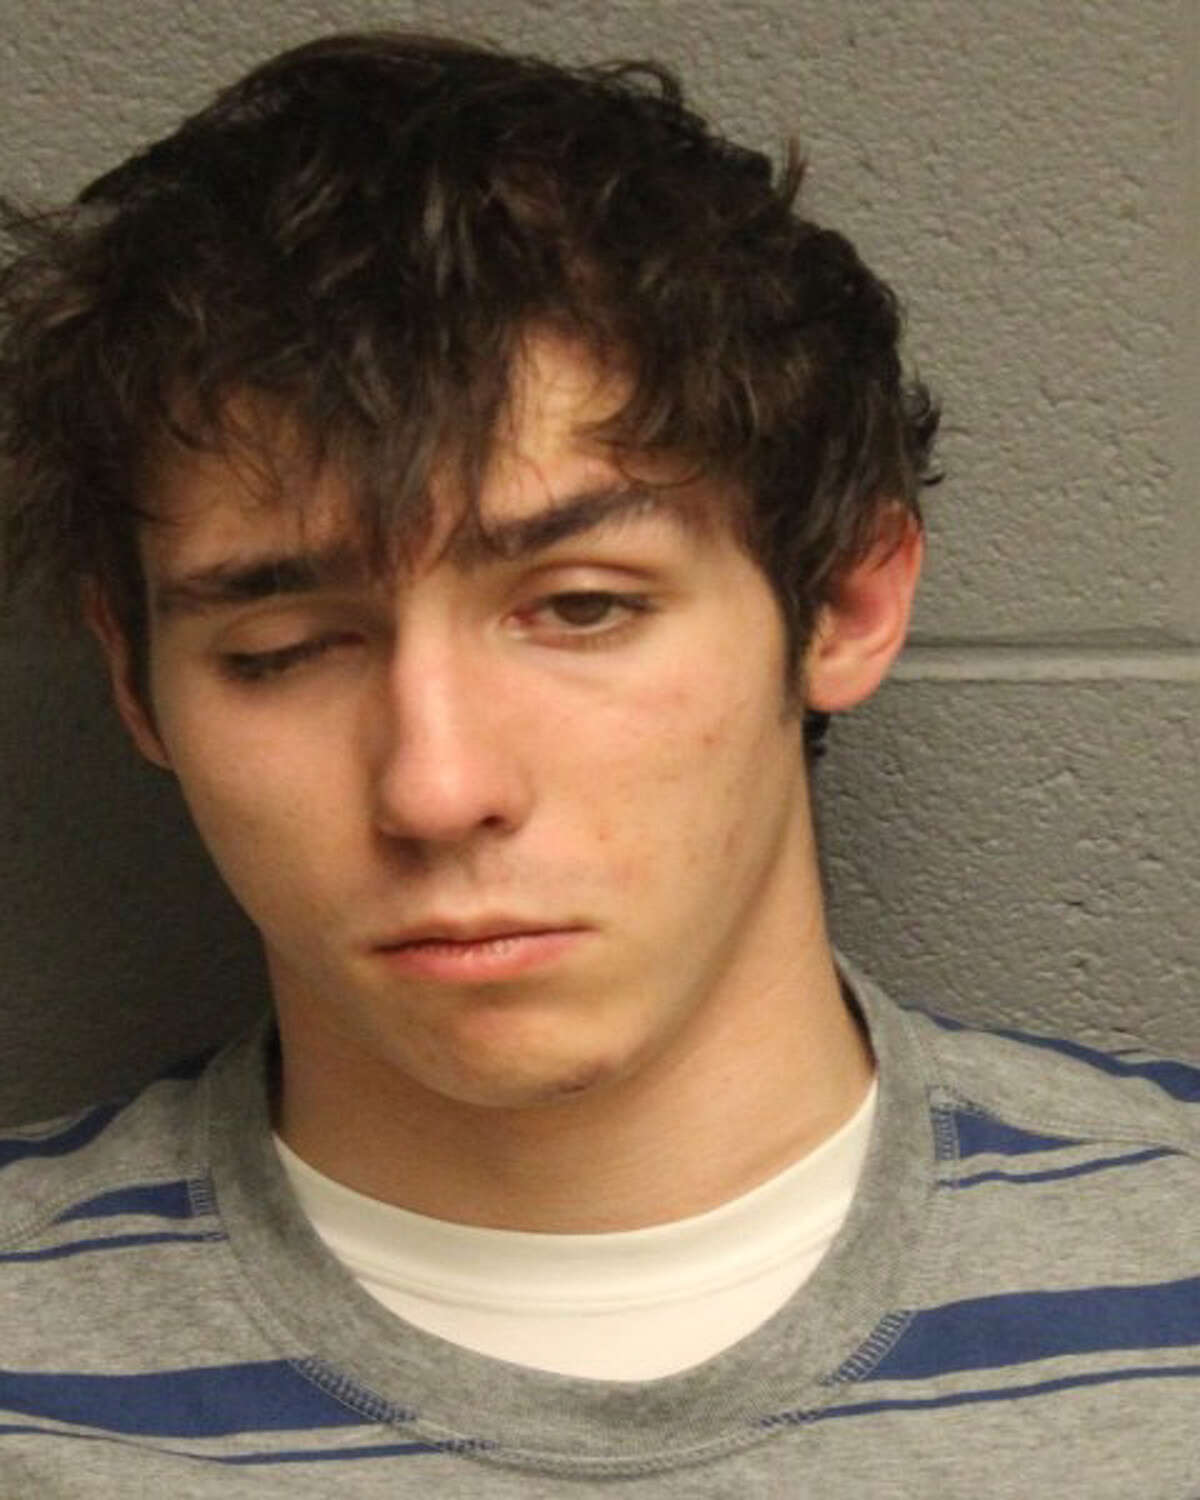 Monroe police arrested Nicholas Ludwig on drug and larceny charges on Dec. 23.